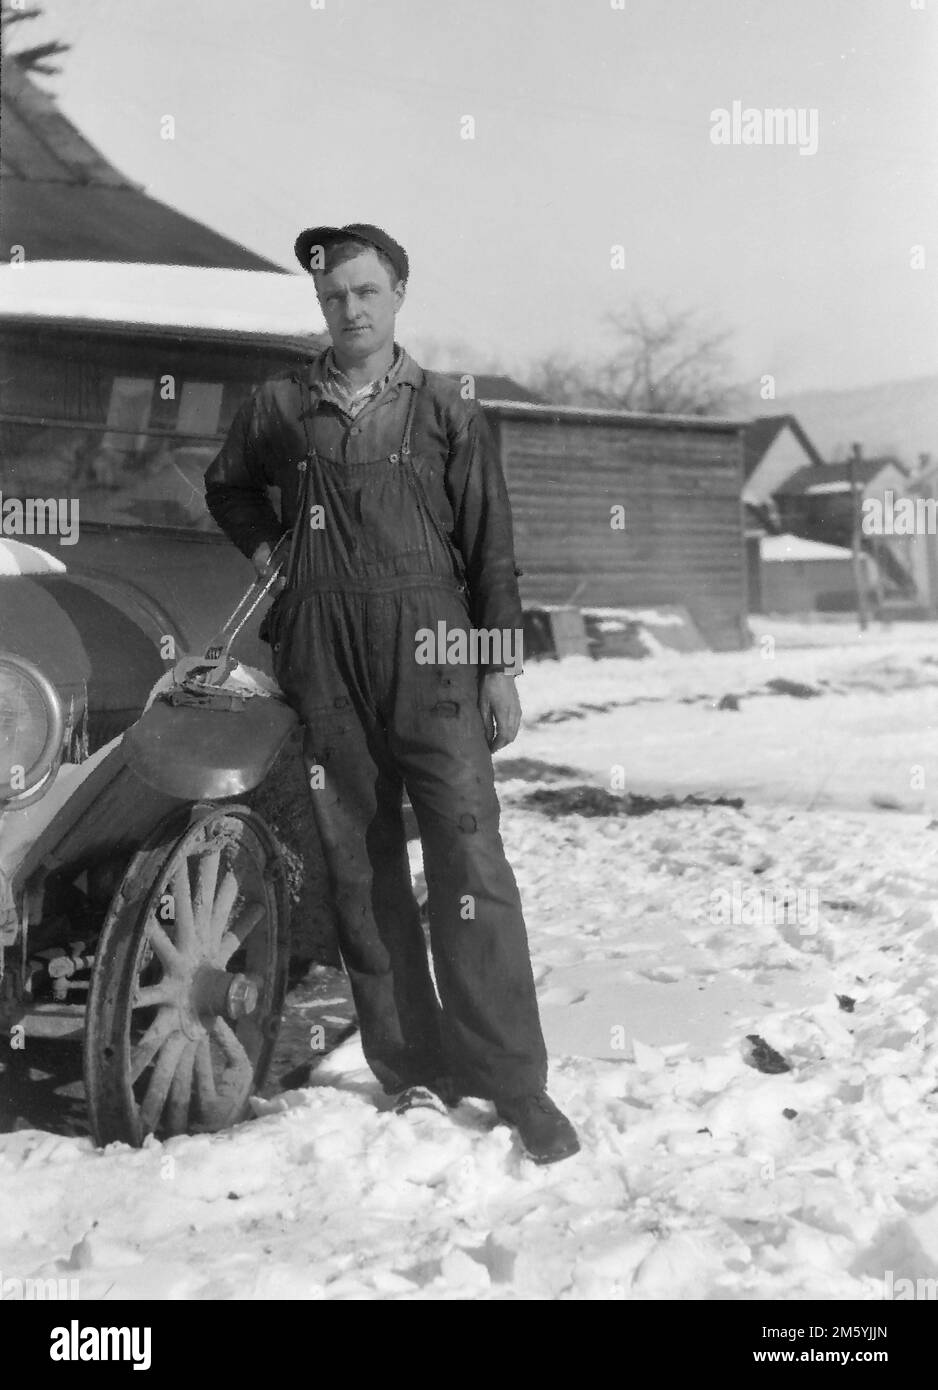 A man with a very large crescent wrench stands by a snow bound car he is repairing, ca. 1930. Stock Photo